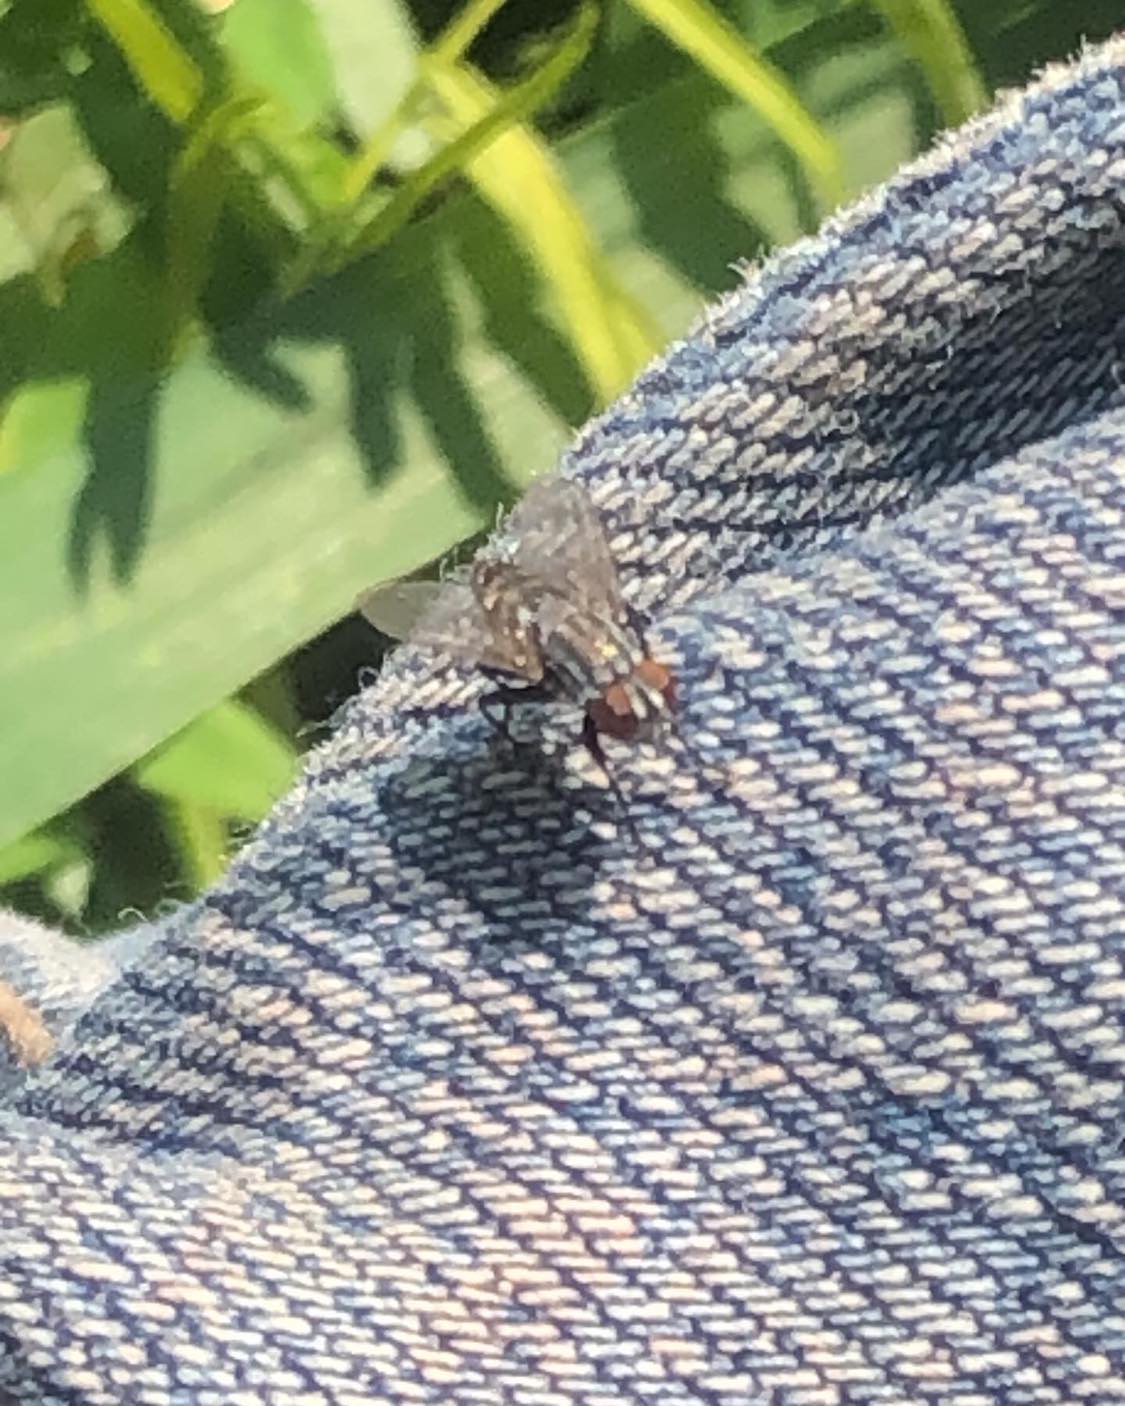 A closeup of a fly from that grassy patch, sitting on the denim of Kabutroid's leg